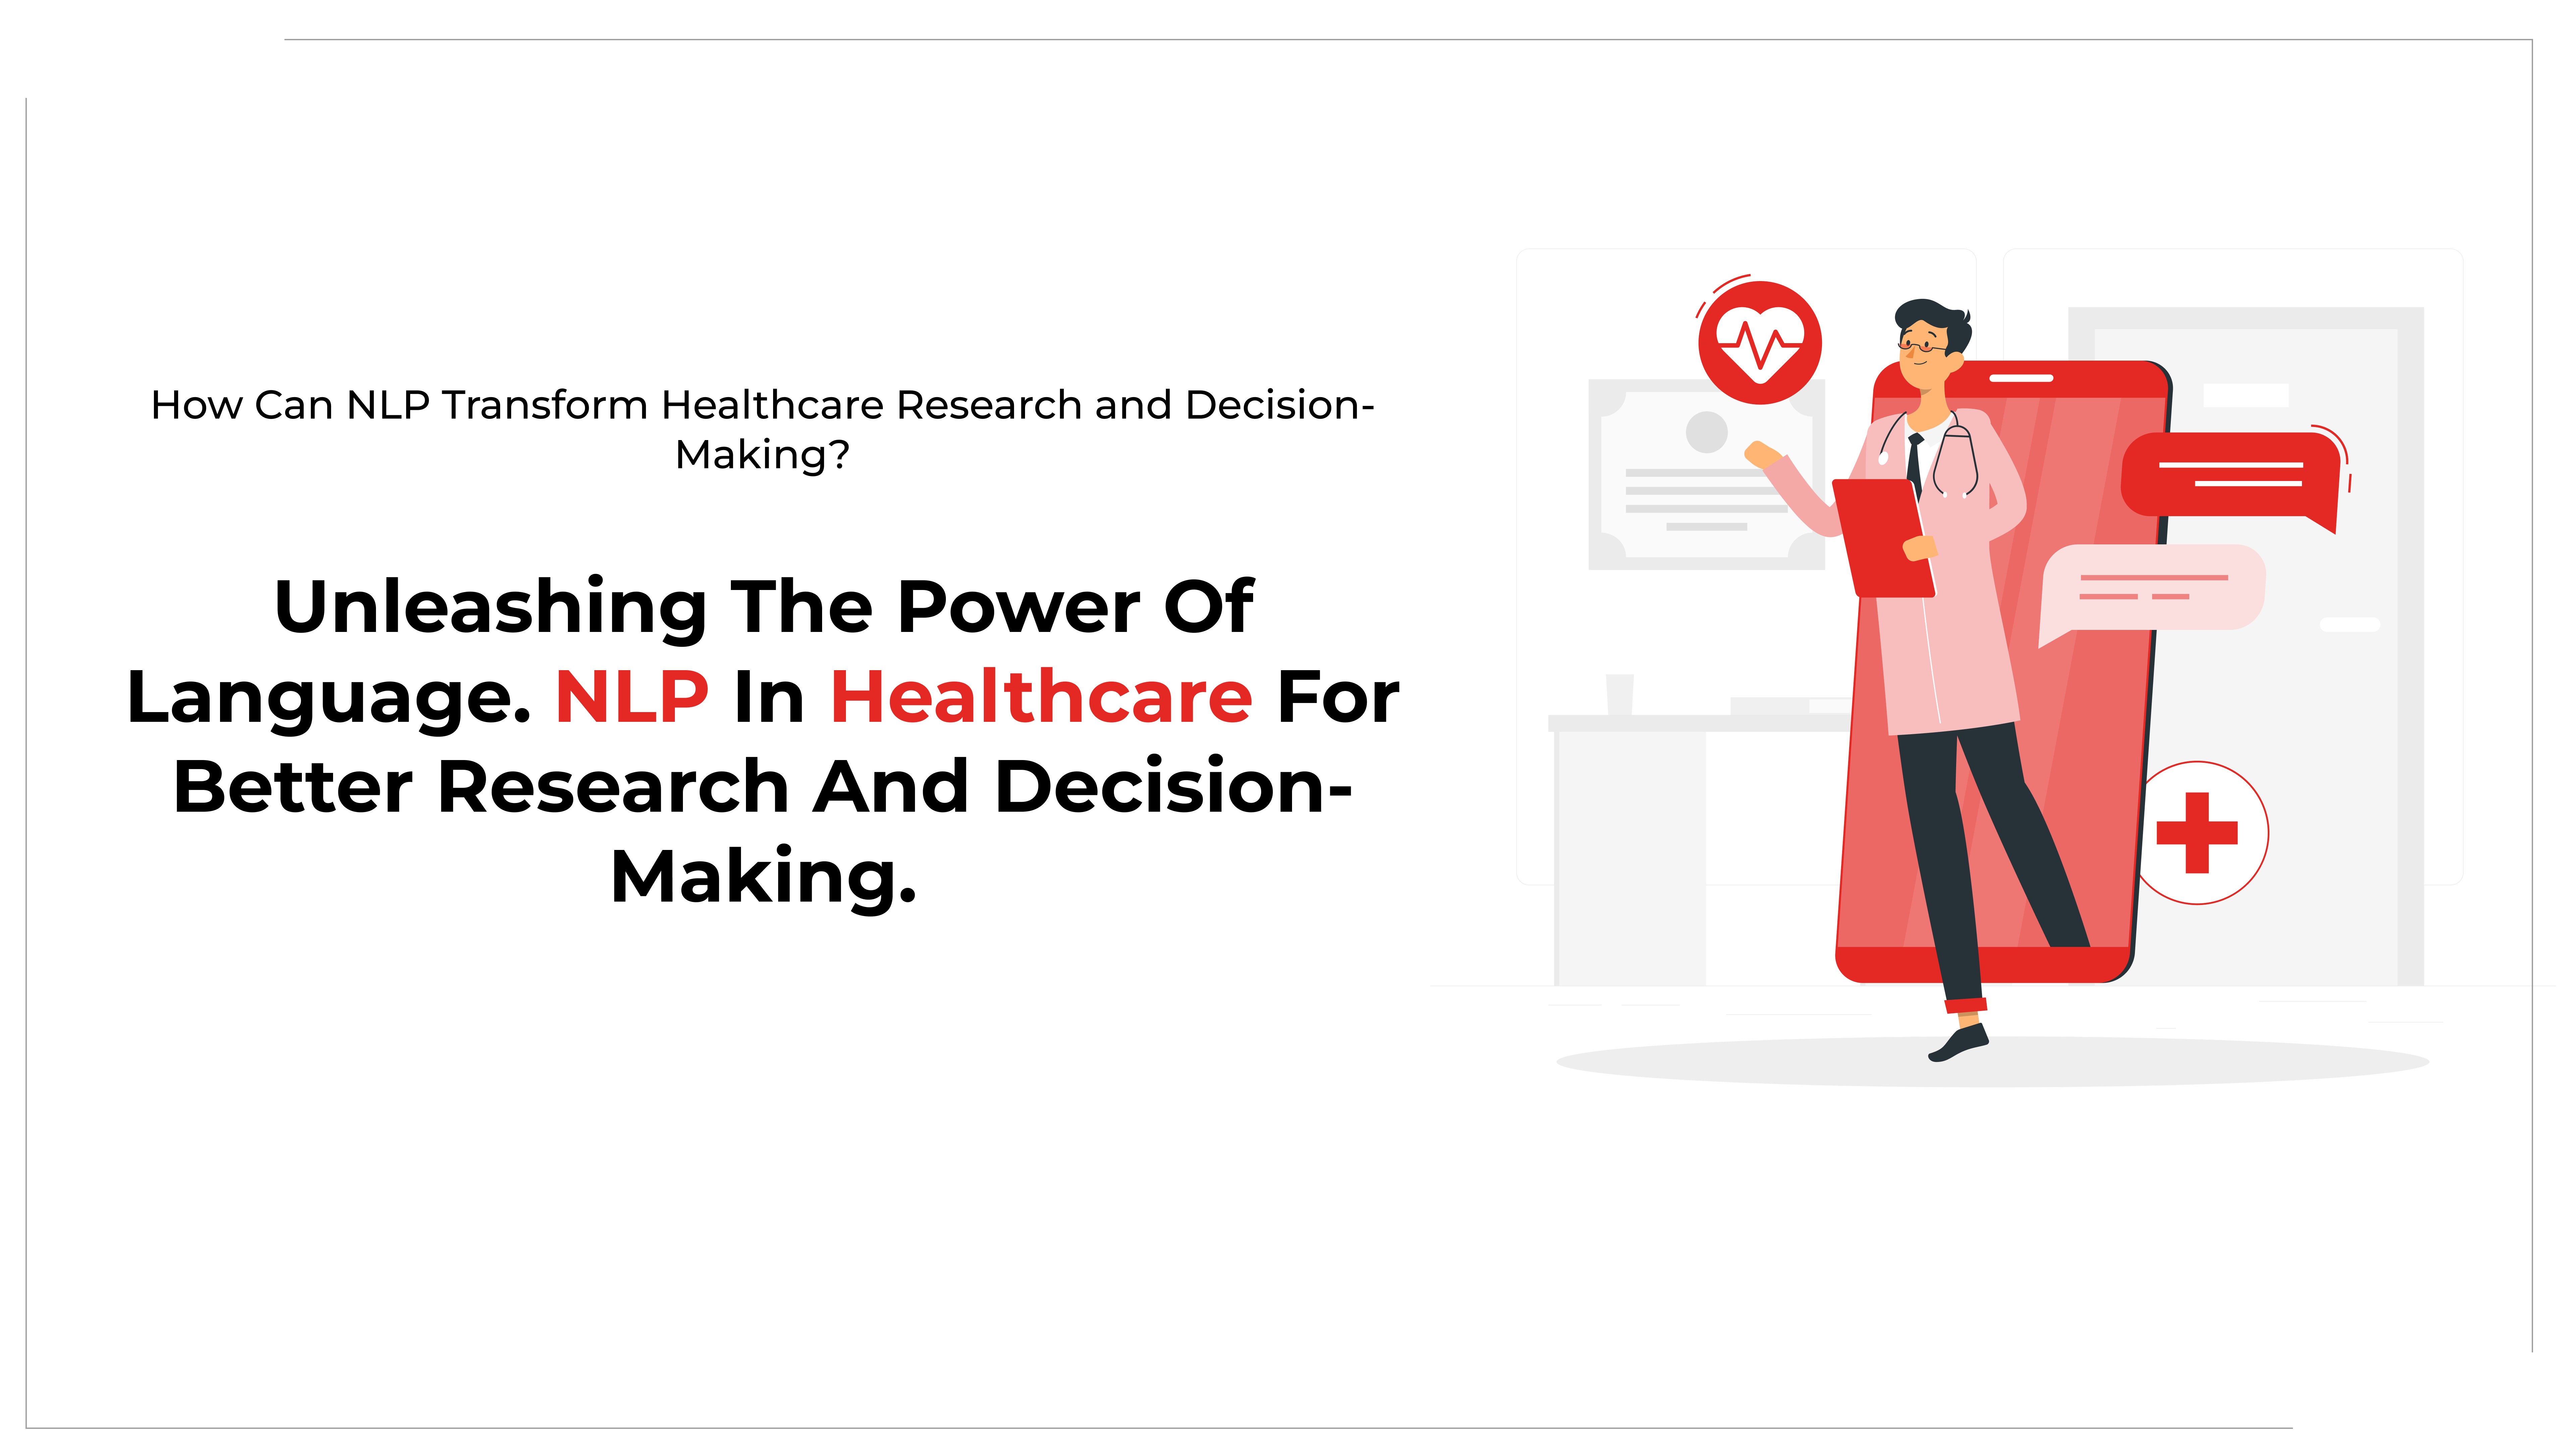 unleashing the power of NLP in healthcare